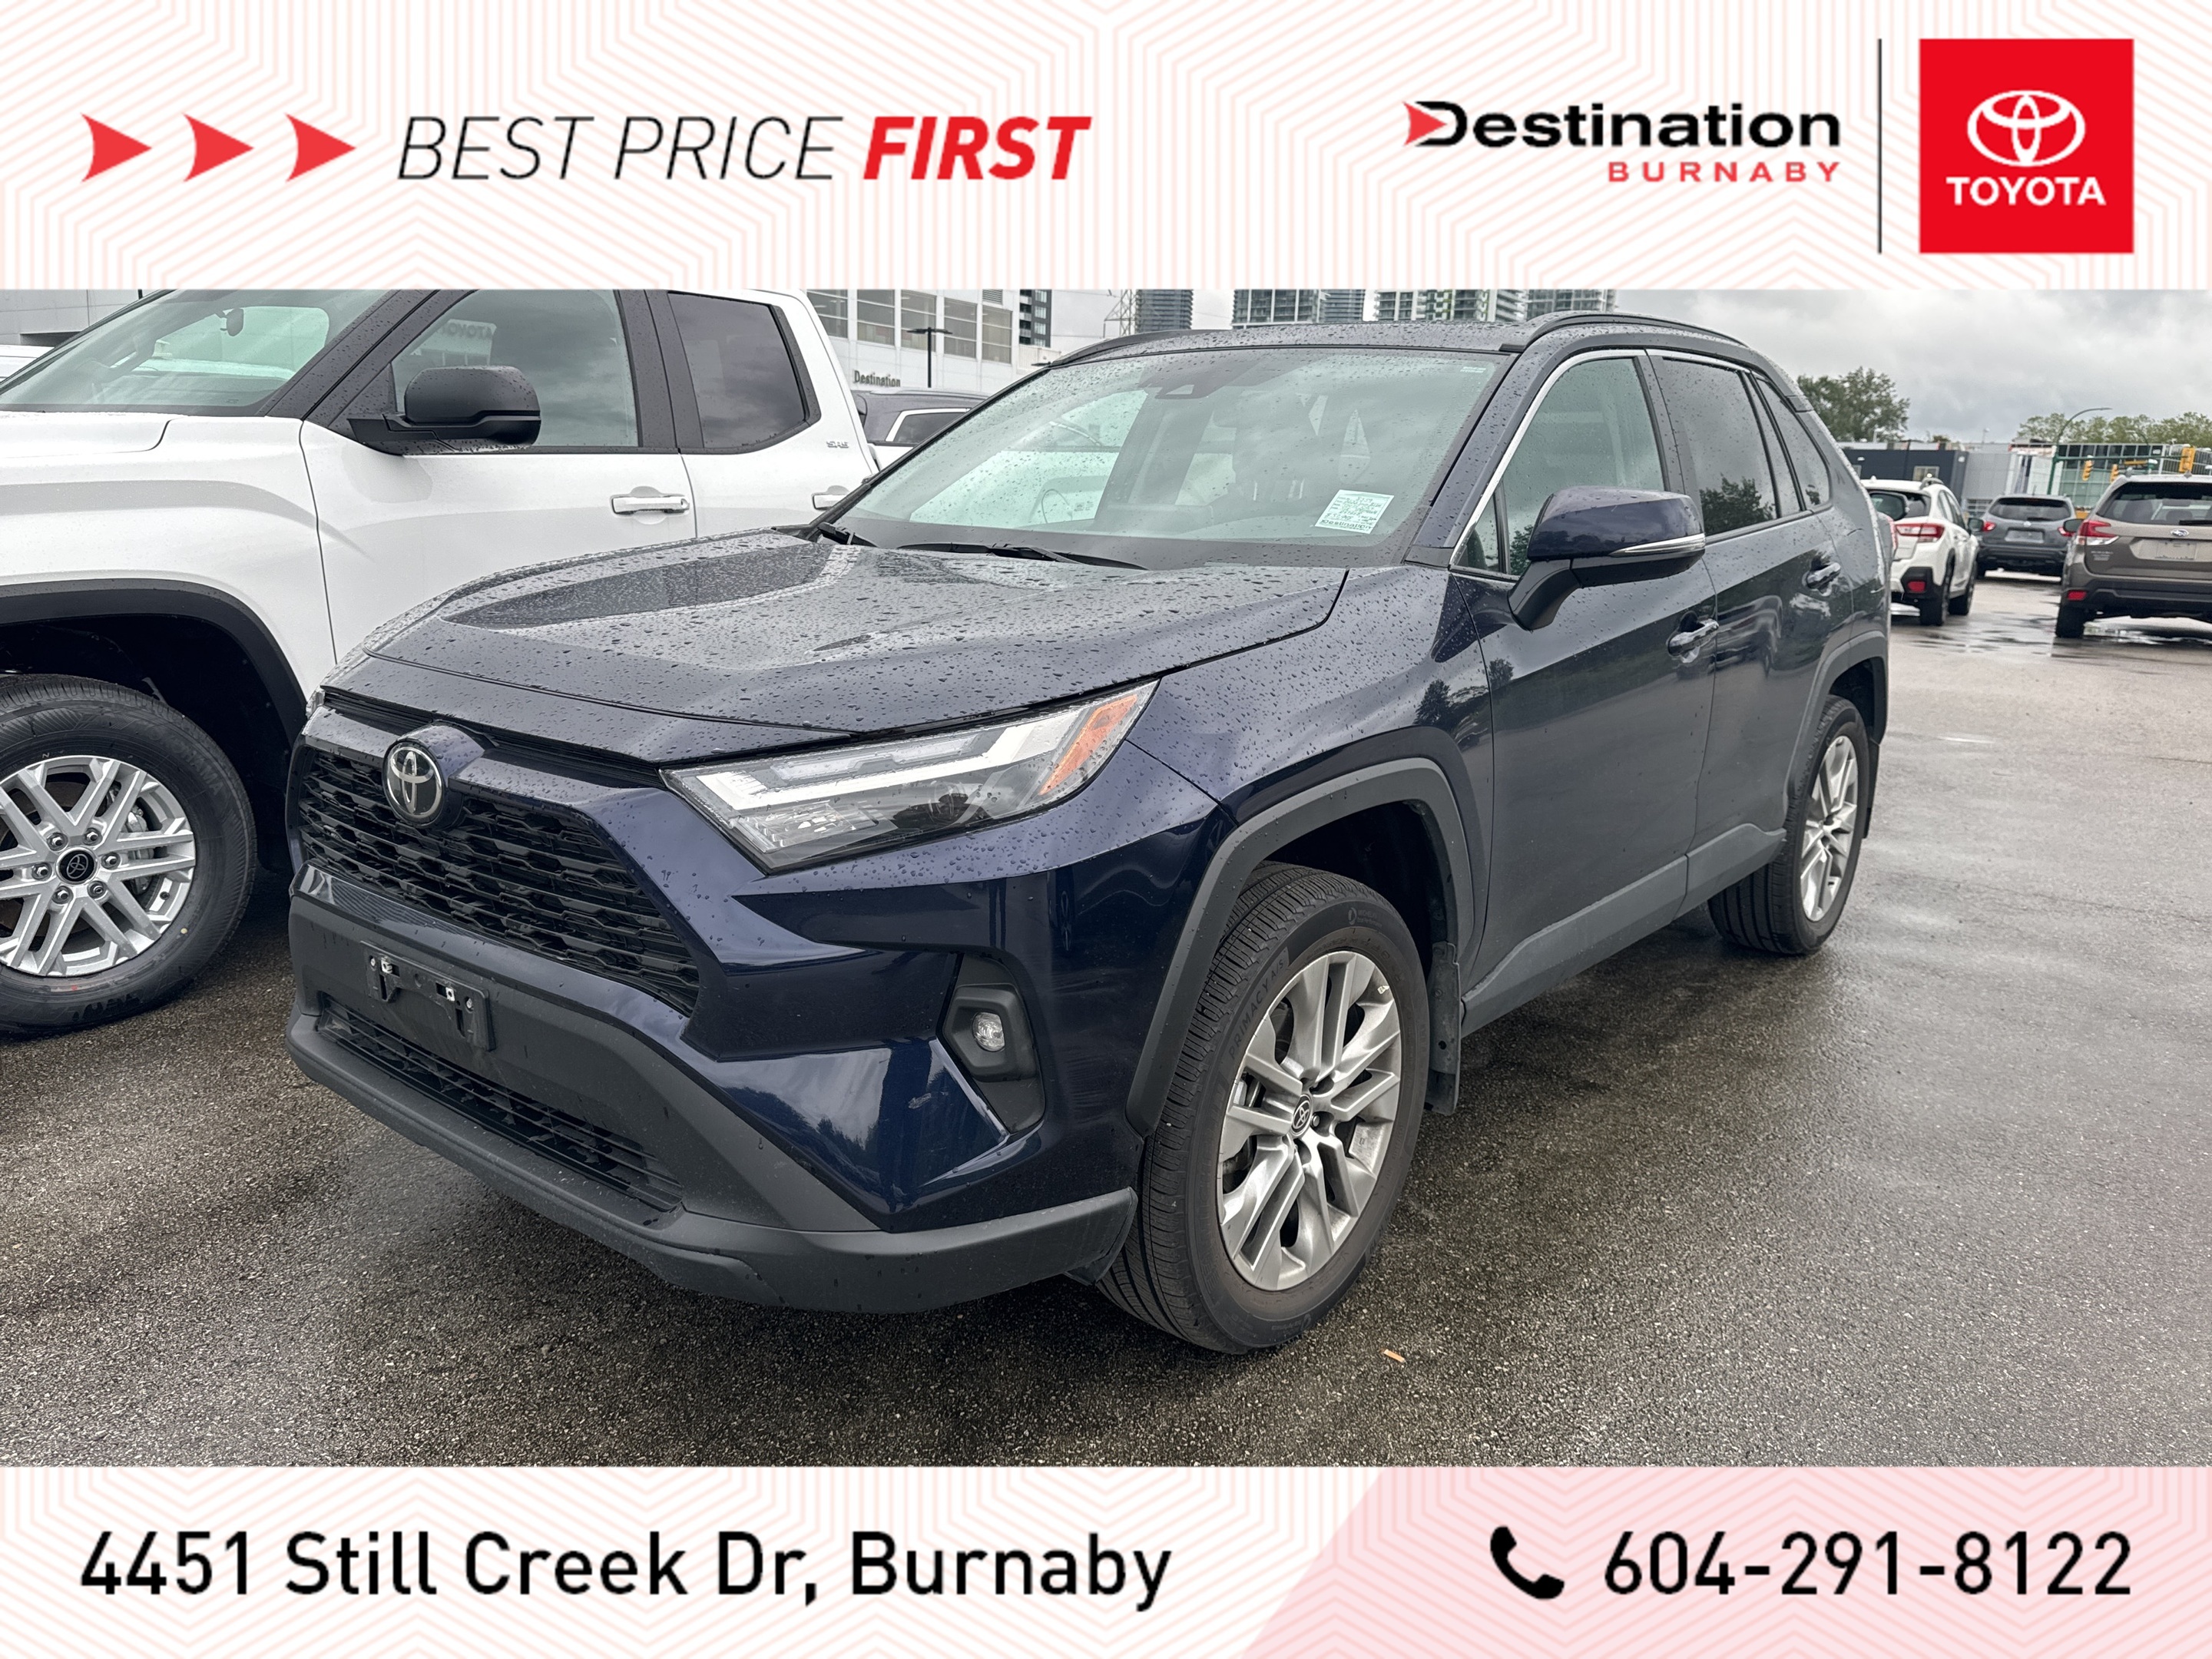 2022 Toyota RAV4 XLE Premium, Leather, Back up Cam Toyota Certified